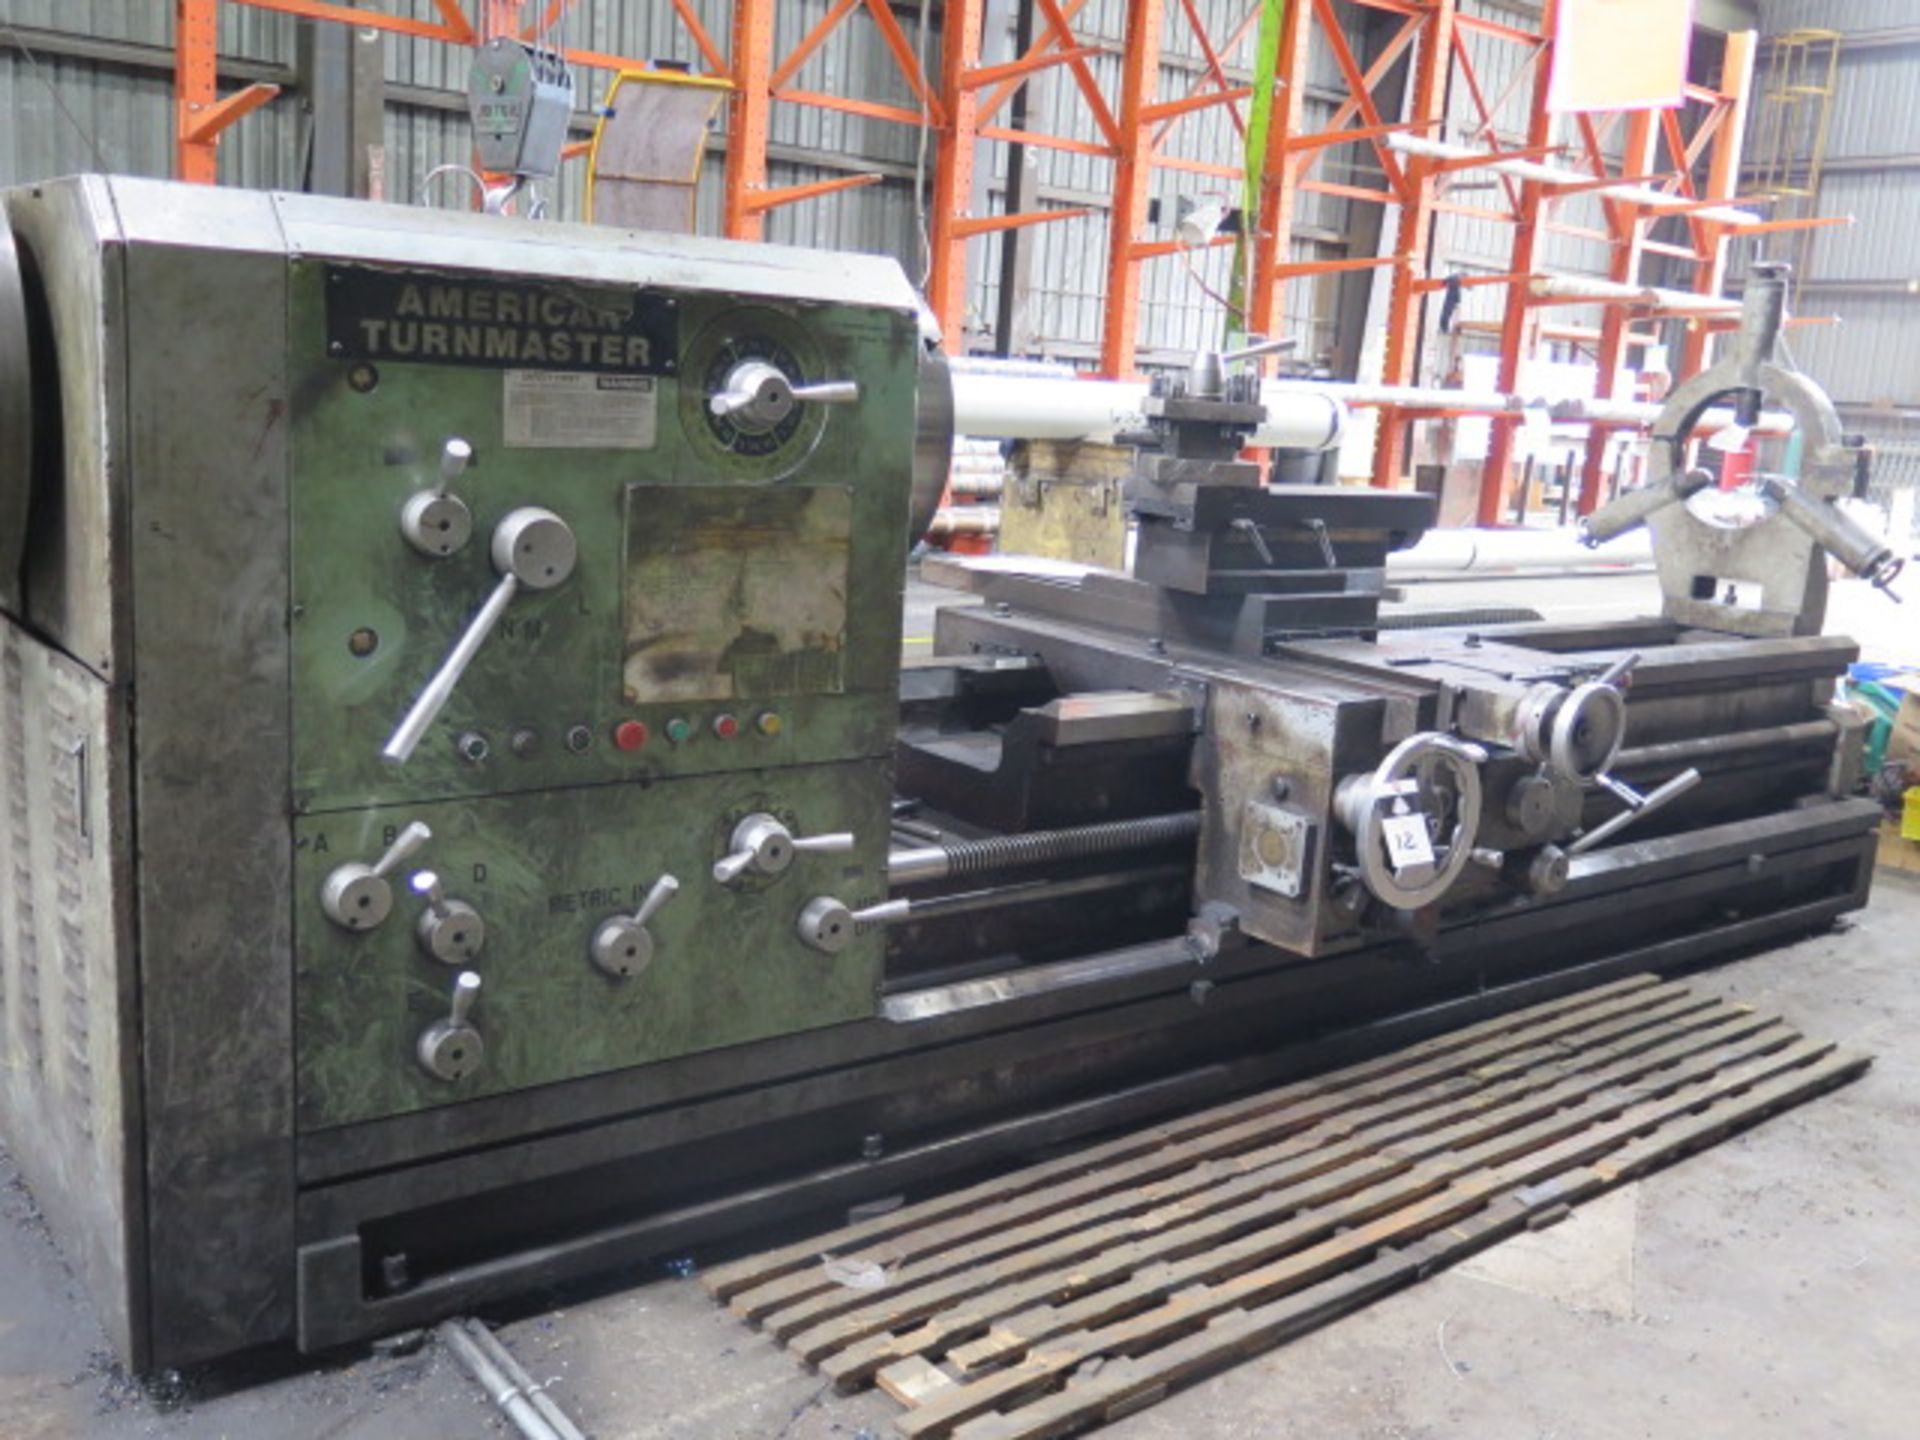 American Turnmaster HT-3580 35” x 80” Big Bore Geared Gap Bed Lathe w/ 6” Spindle Bore, SOLD AS IS - Image 2 of 15